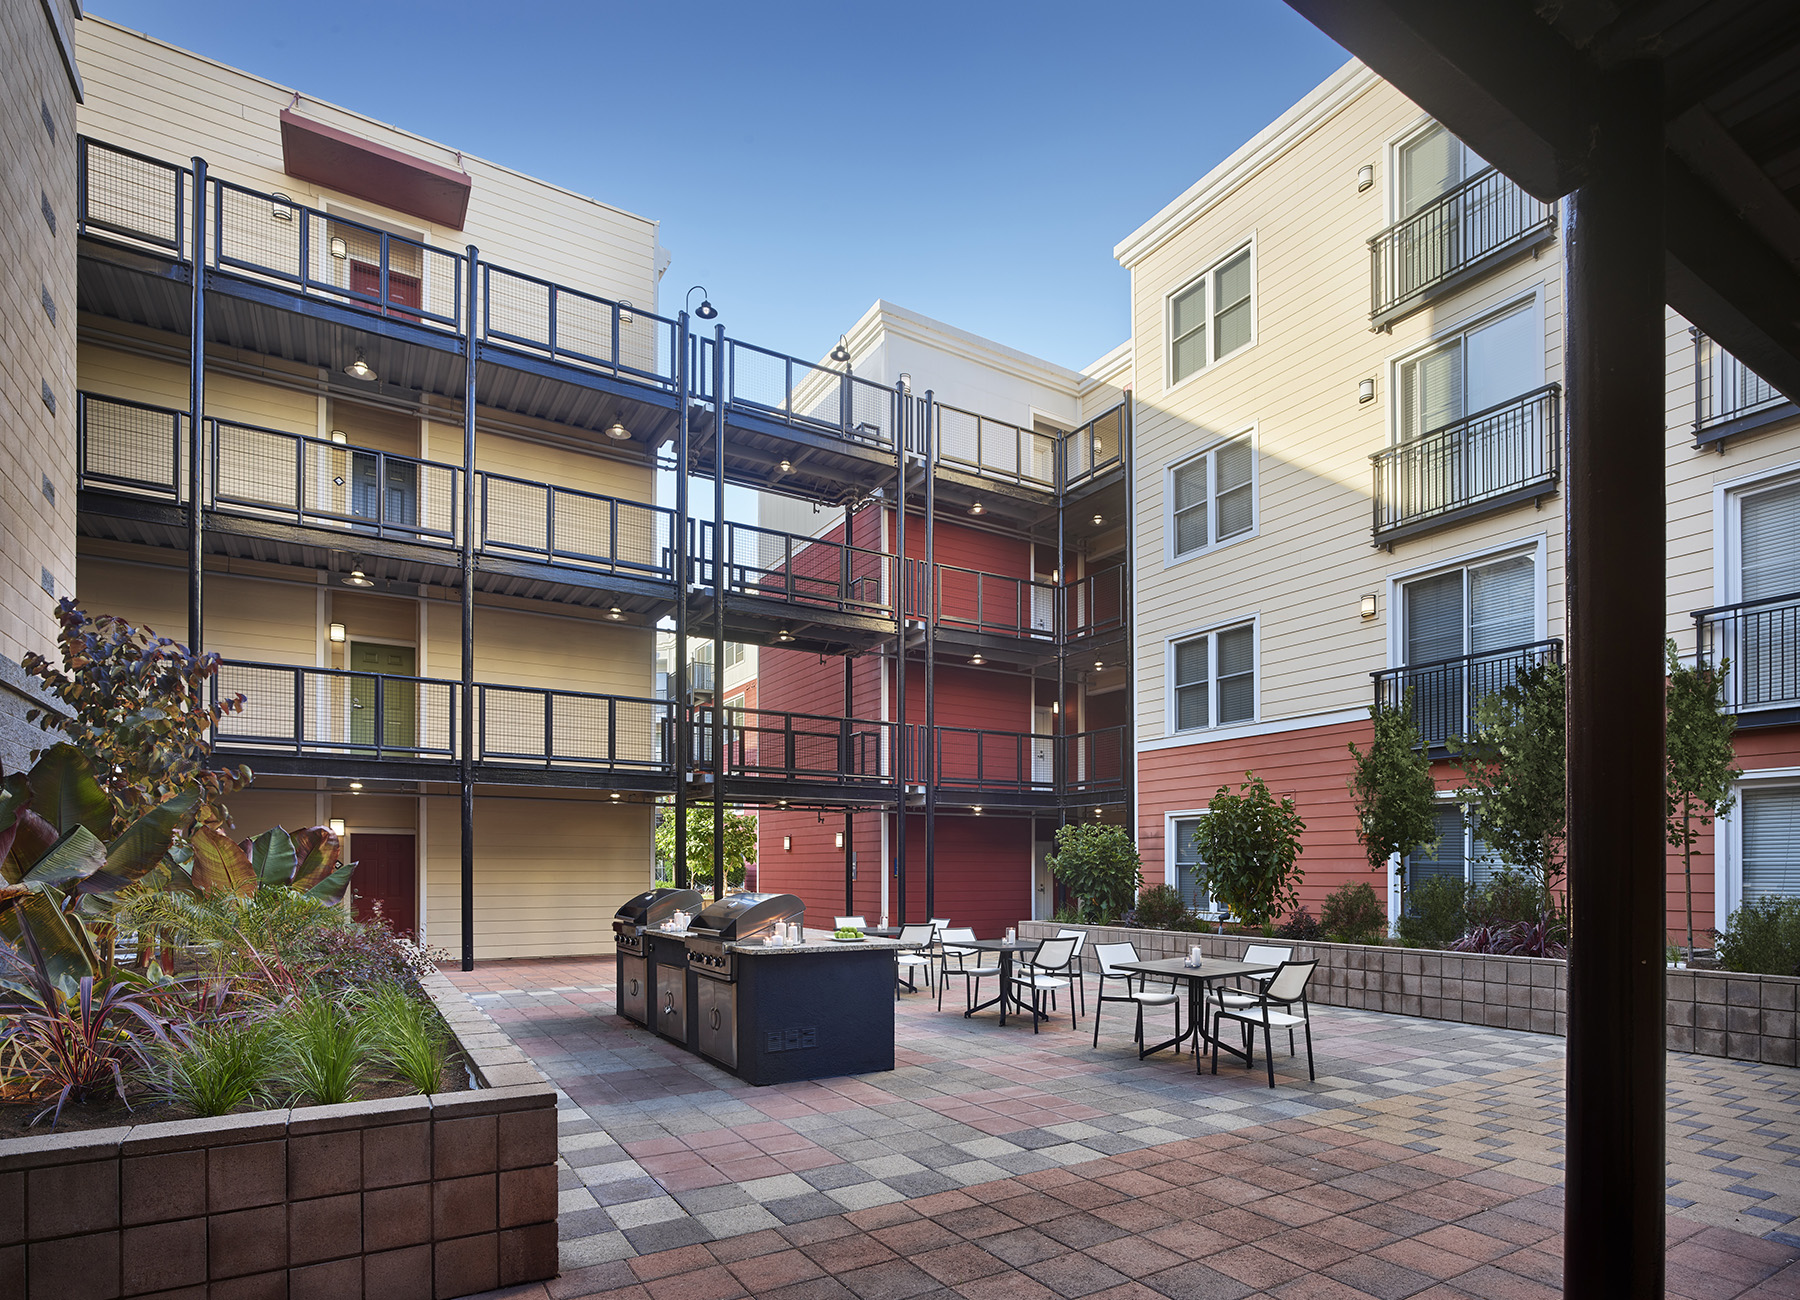 Exterior courtyard with tables and bbq grills, surrounded by a mid rise apartment building